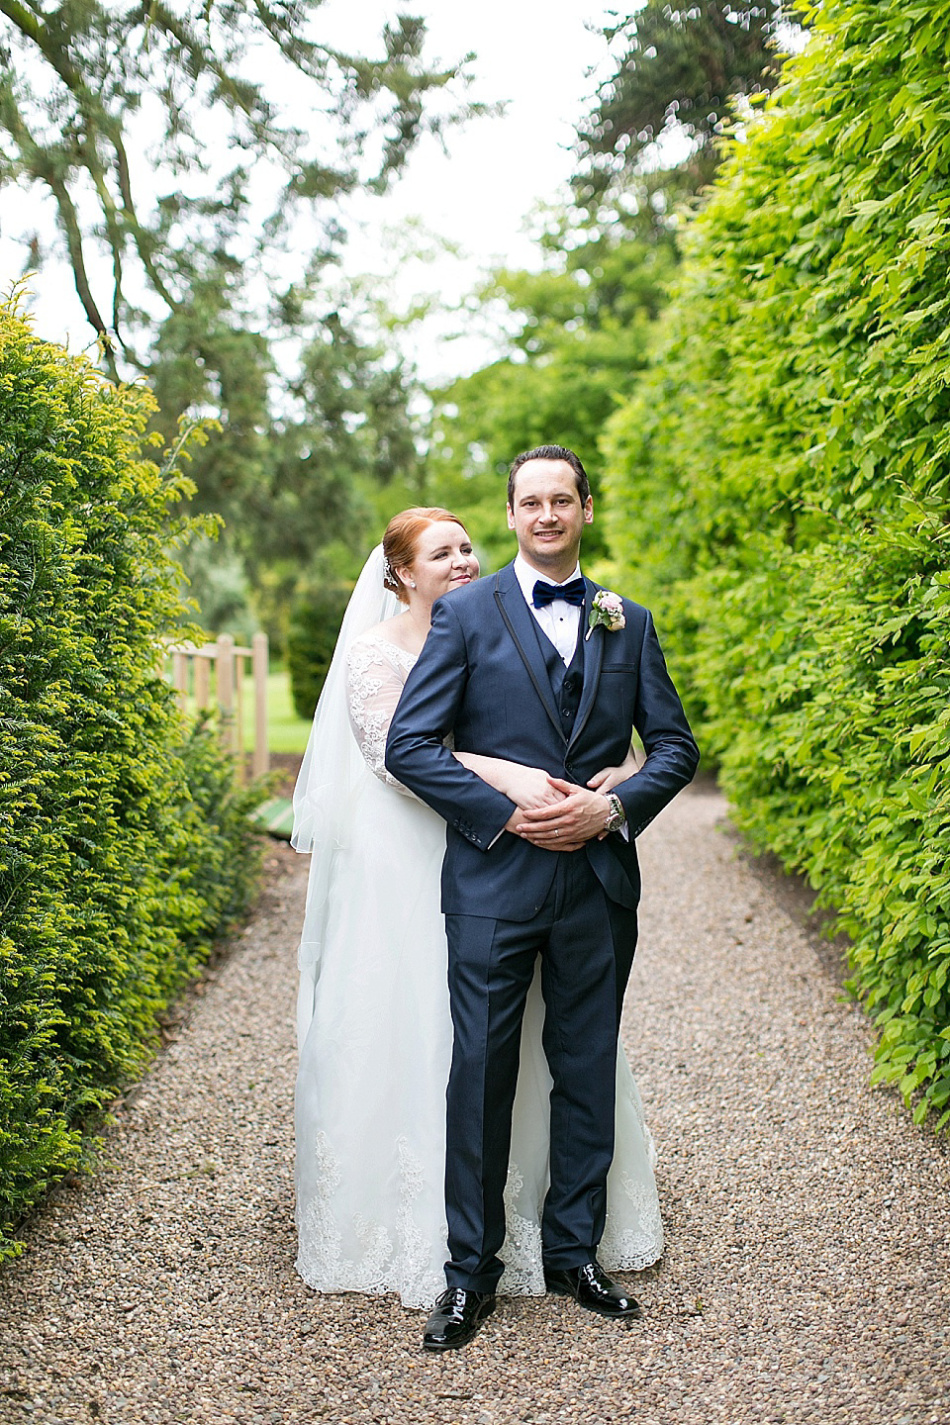 A Charlotte Balbier Gown for an Elegant Black Tie Wedding